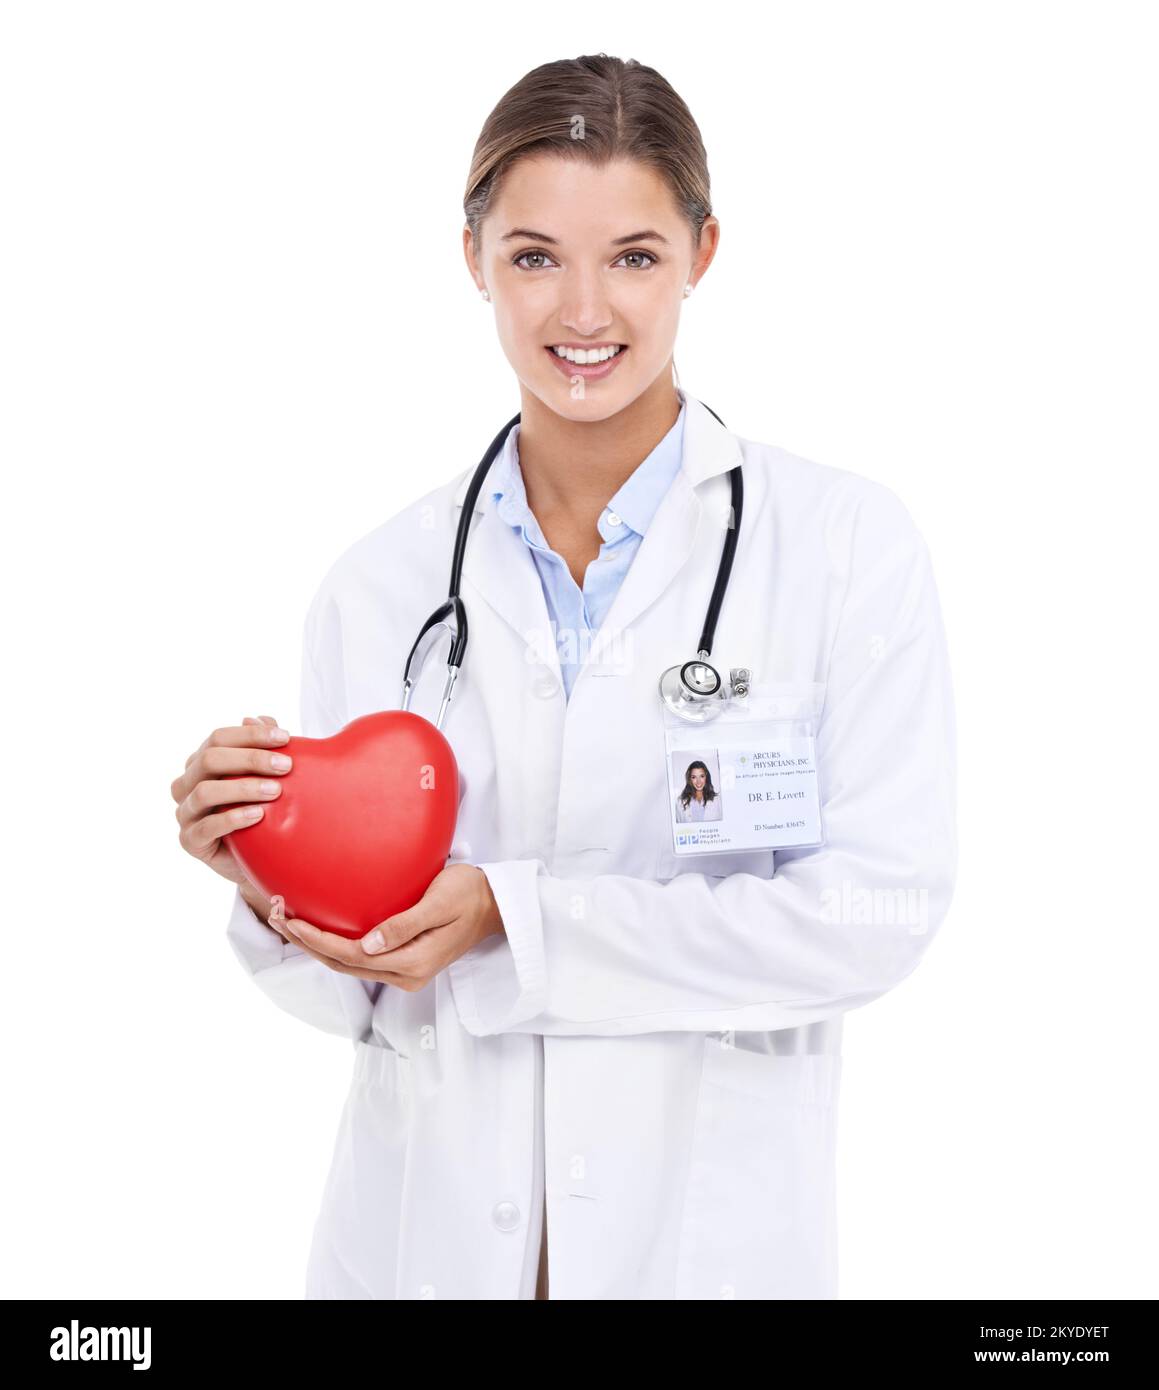 Take care of your heart. Cropped portrait of a young female cardiologist holding a heart shape. Stock Photo